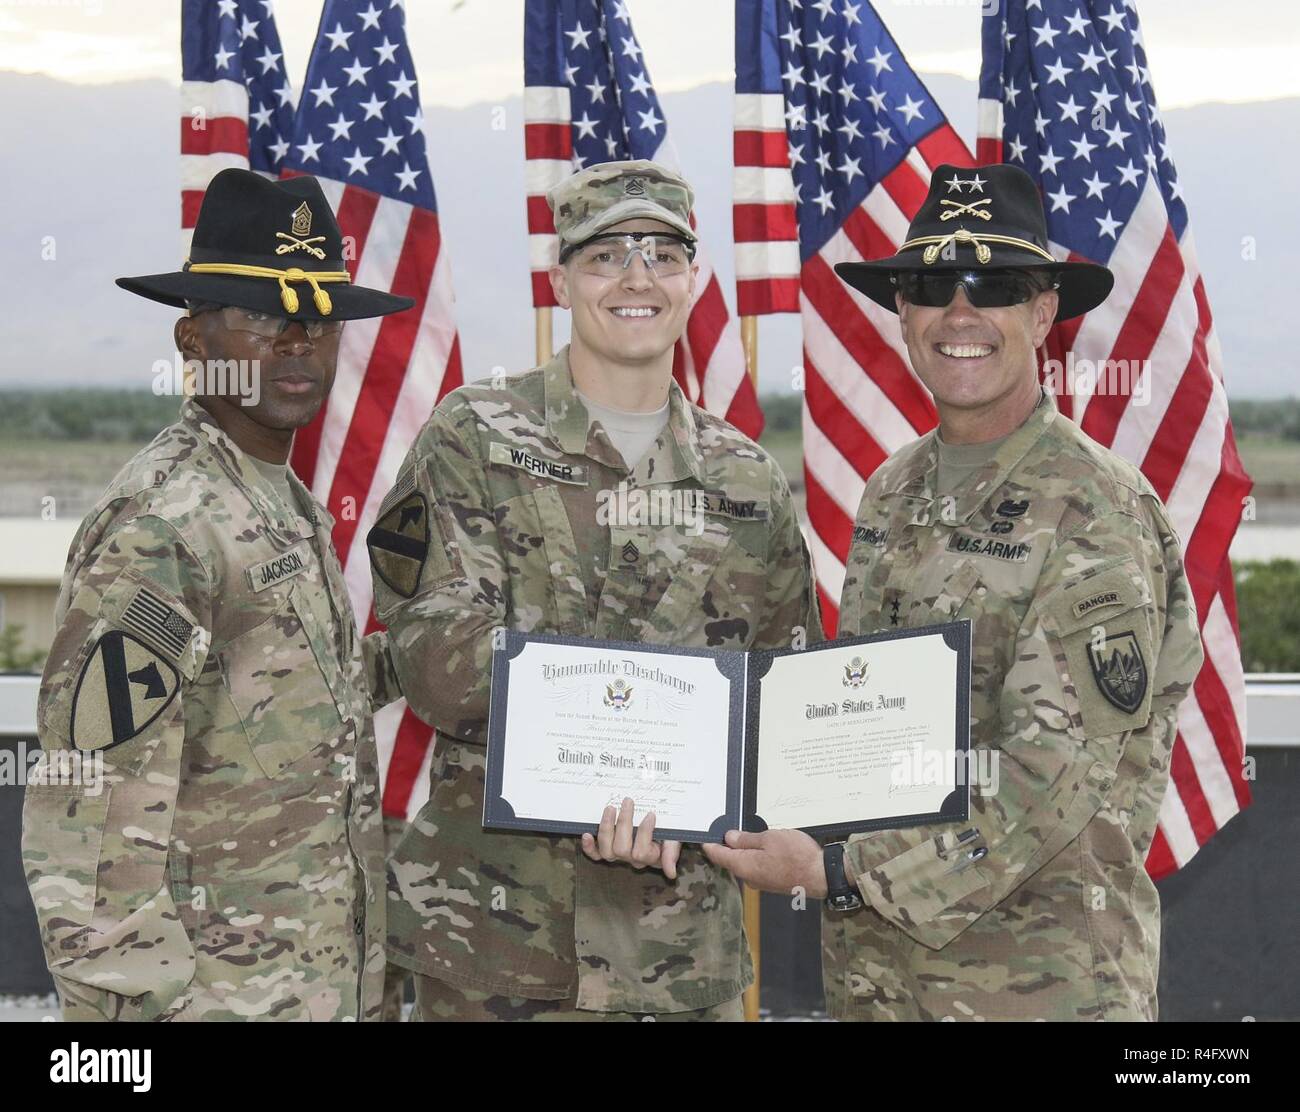 The 1st Cavalry Division Sustainment Brigade hosted a mass reenlistment ceremony at Bagram Airfield, Afghanistan on May 2, 2017.     The ceremony gave the 17 Soldiers the opportunity to be reenlisted by the 1st Cavalry Division Commander, Maj. Gen. J. T. Thomson.    “Reenlisting some amazing CAV Troopers, is the best thing I have done all day,” said Thomson.     Maj. Gen. Thomson and 1st Cavalry Division Command Sgt. Maj. Maurice Jackson presented Staff Sgt. Jonathan Werner with a coin and his reenlistment certificate. Stock Photo